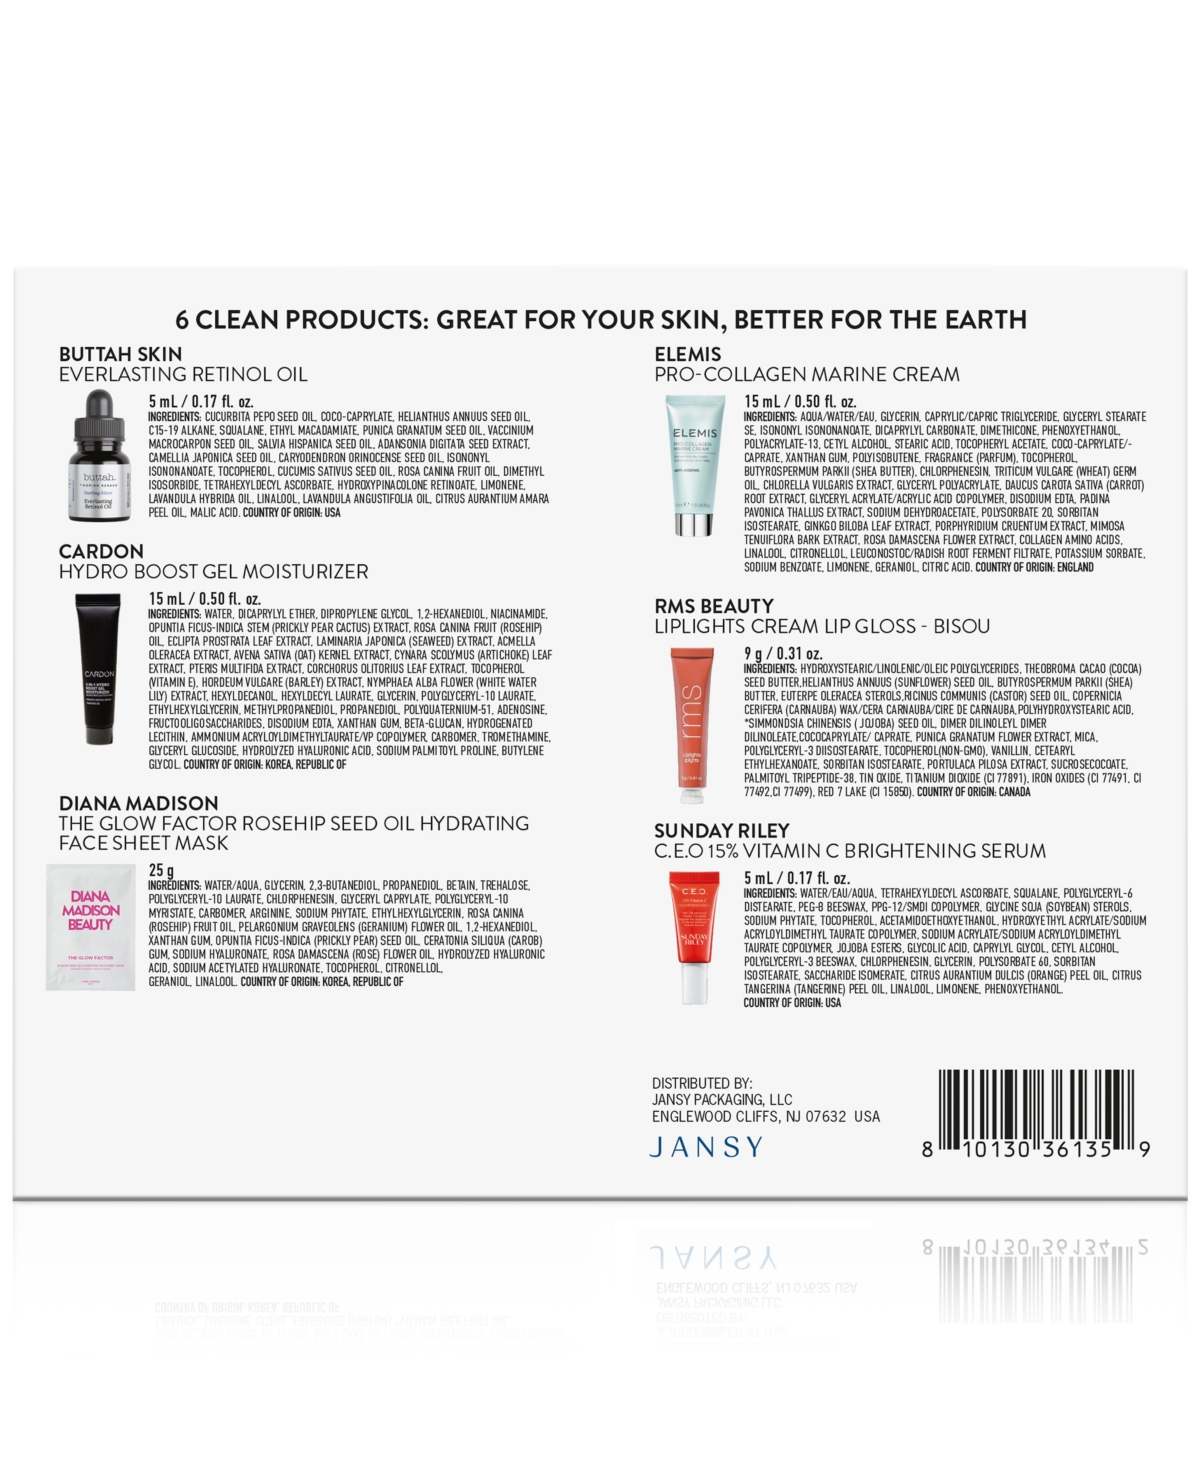 Shop Created For Macy's 6-pc. Conscious Beauty Skincare Set,  In Black